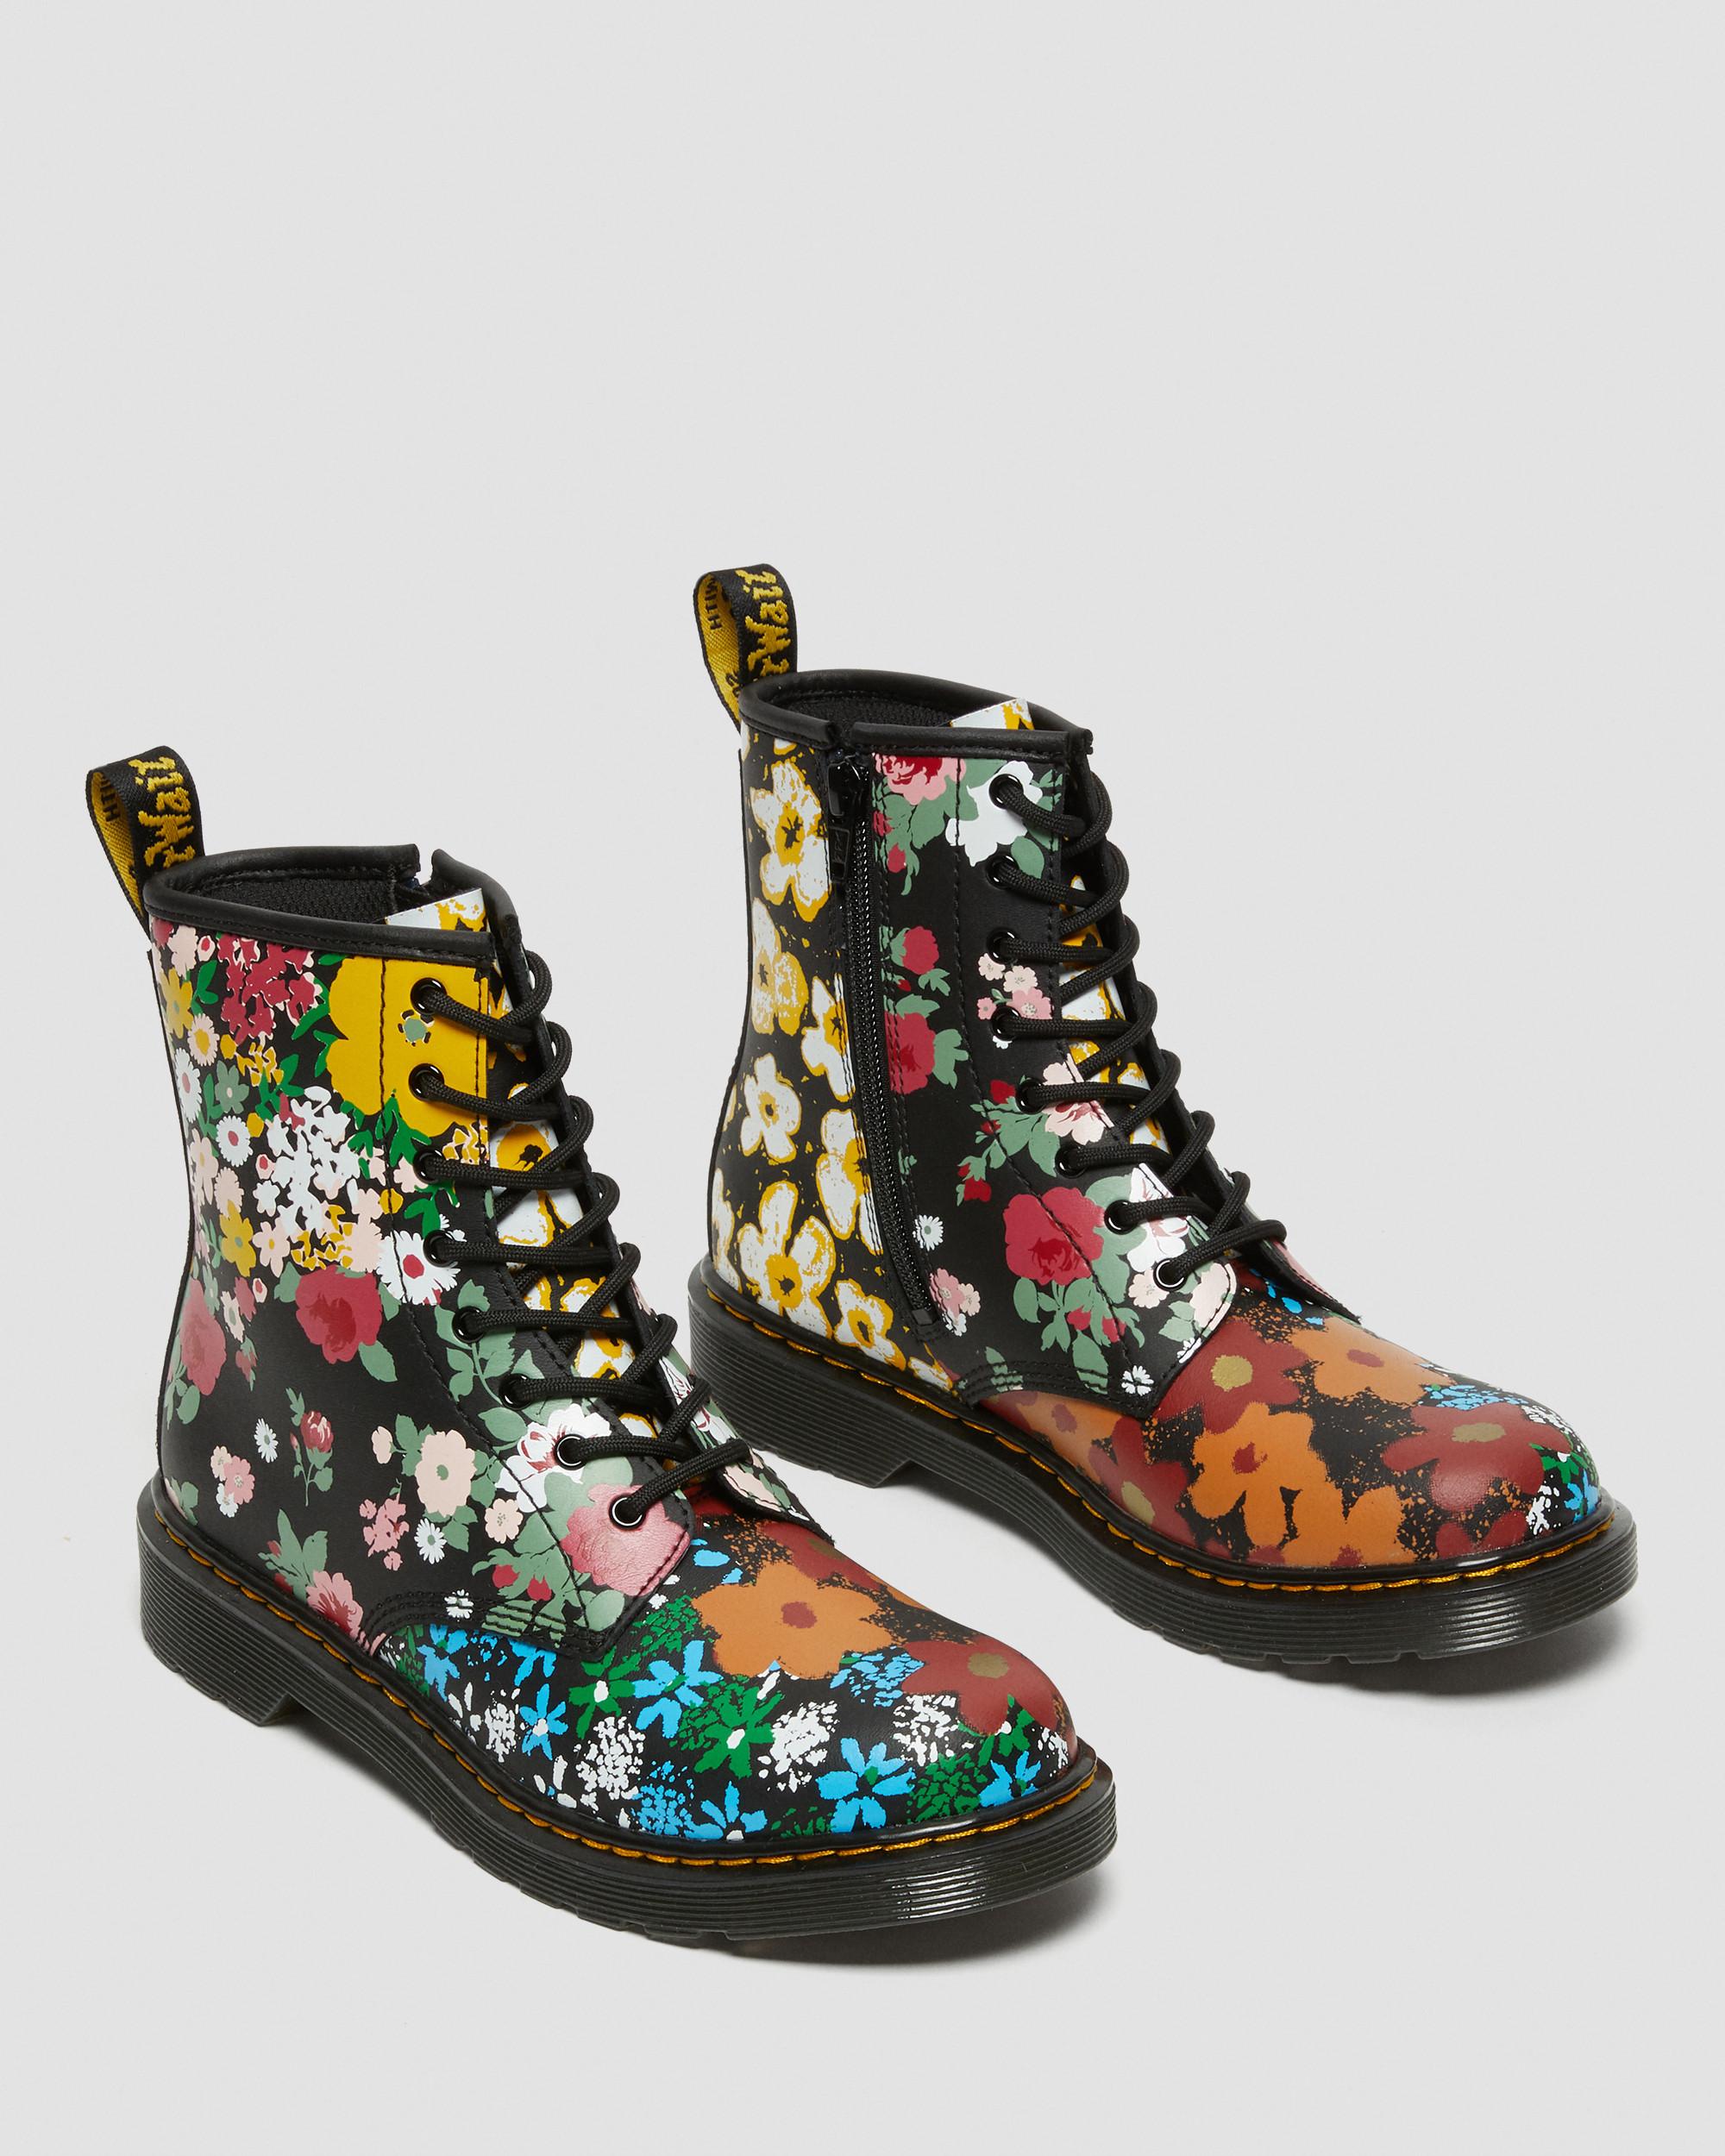 Boots 1460 Up in Lace Black Youth Martens Mash Floral Leather Dr. Up |